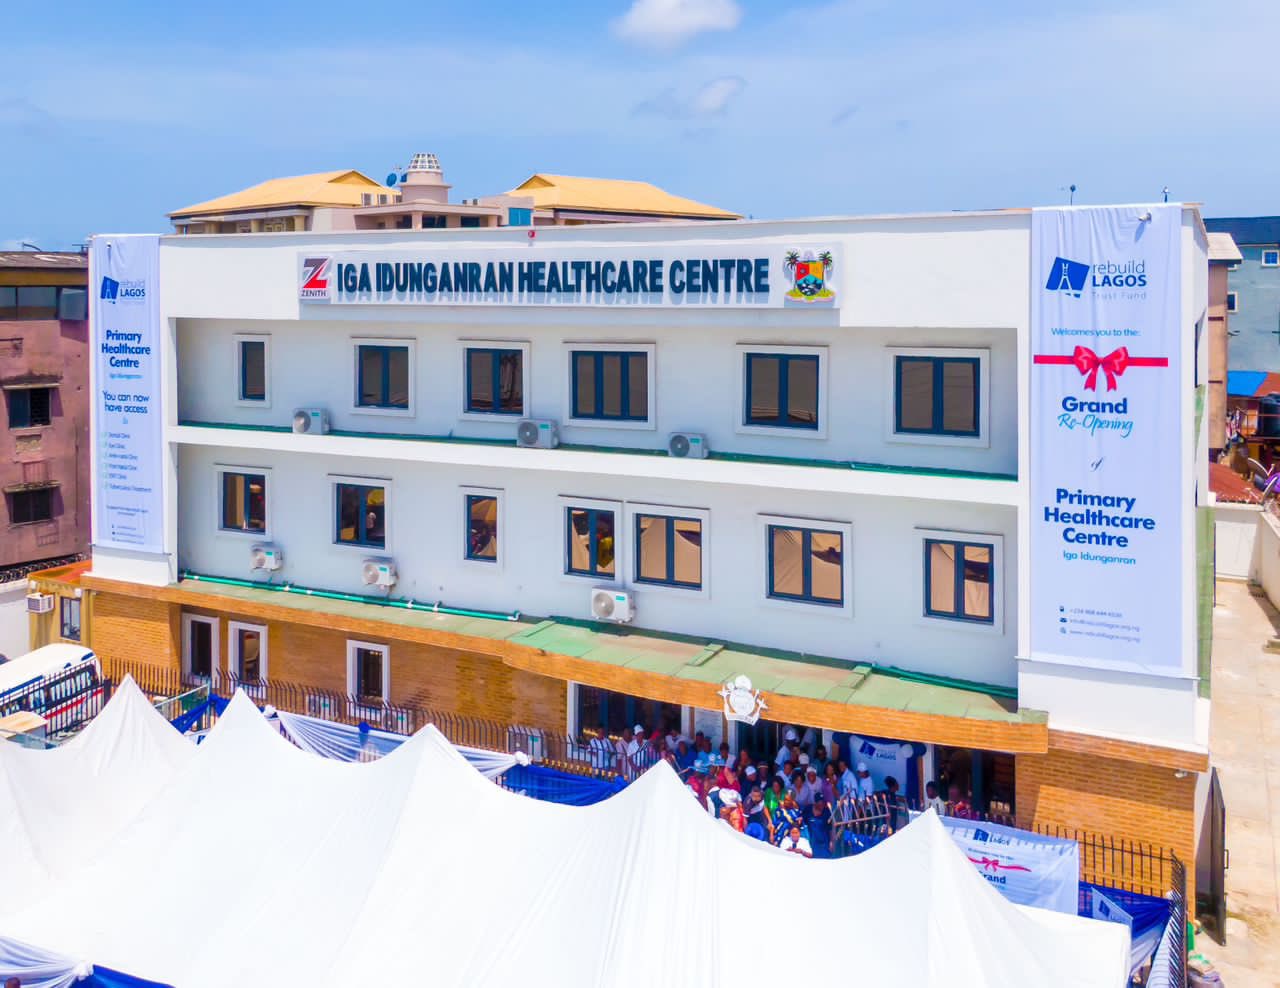 GOV SANWO-OLU OFFICIALLY REOPENED THE REDEVELOPED AND UPGRADED IGA IDUGANRAN PRIMARY HEALTHCARE CENTRE IN ISALE EKO